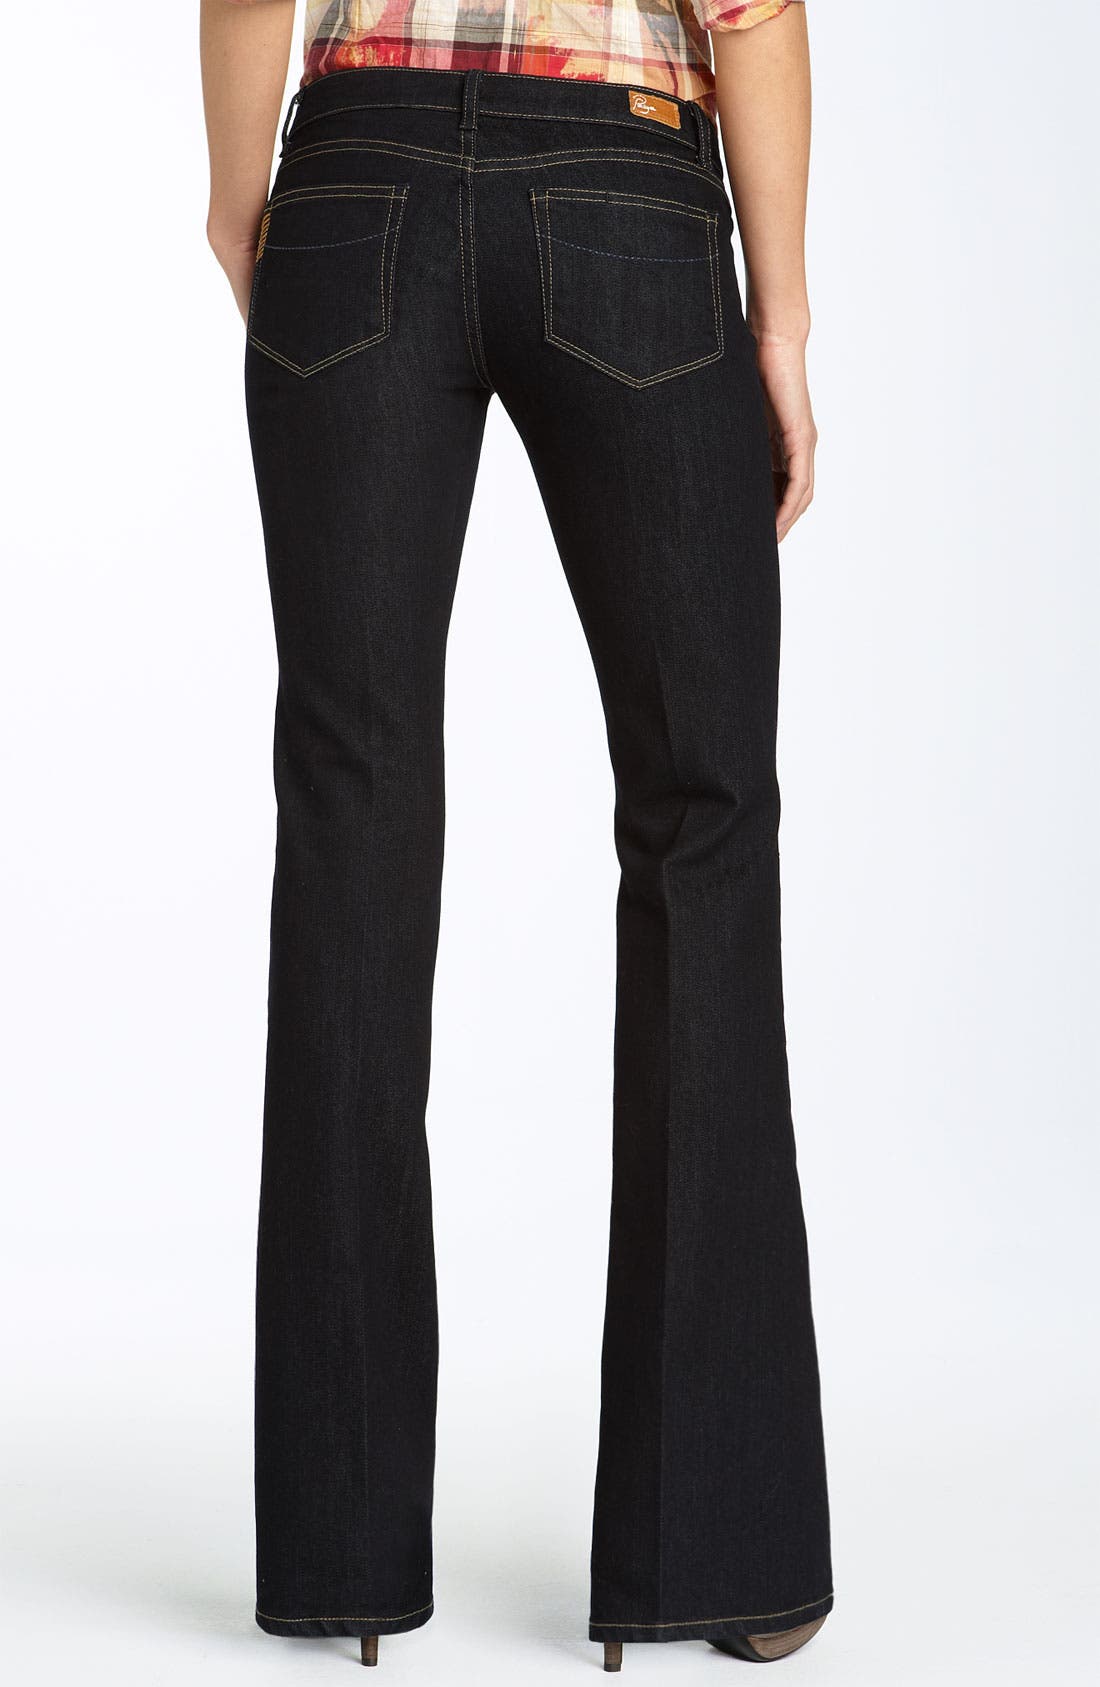 paige canyon boot jeans